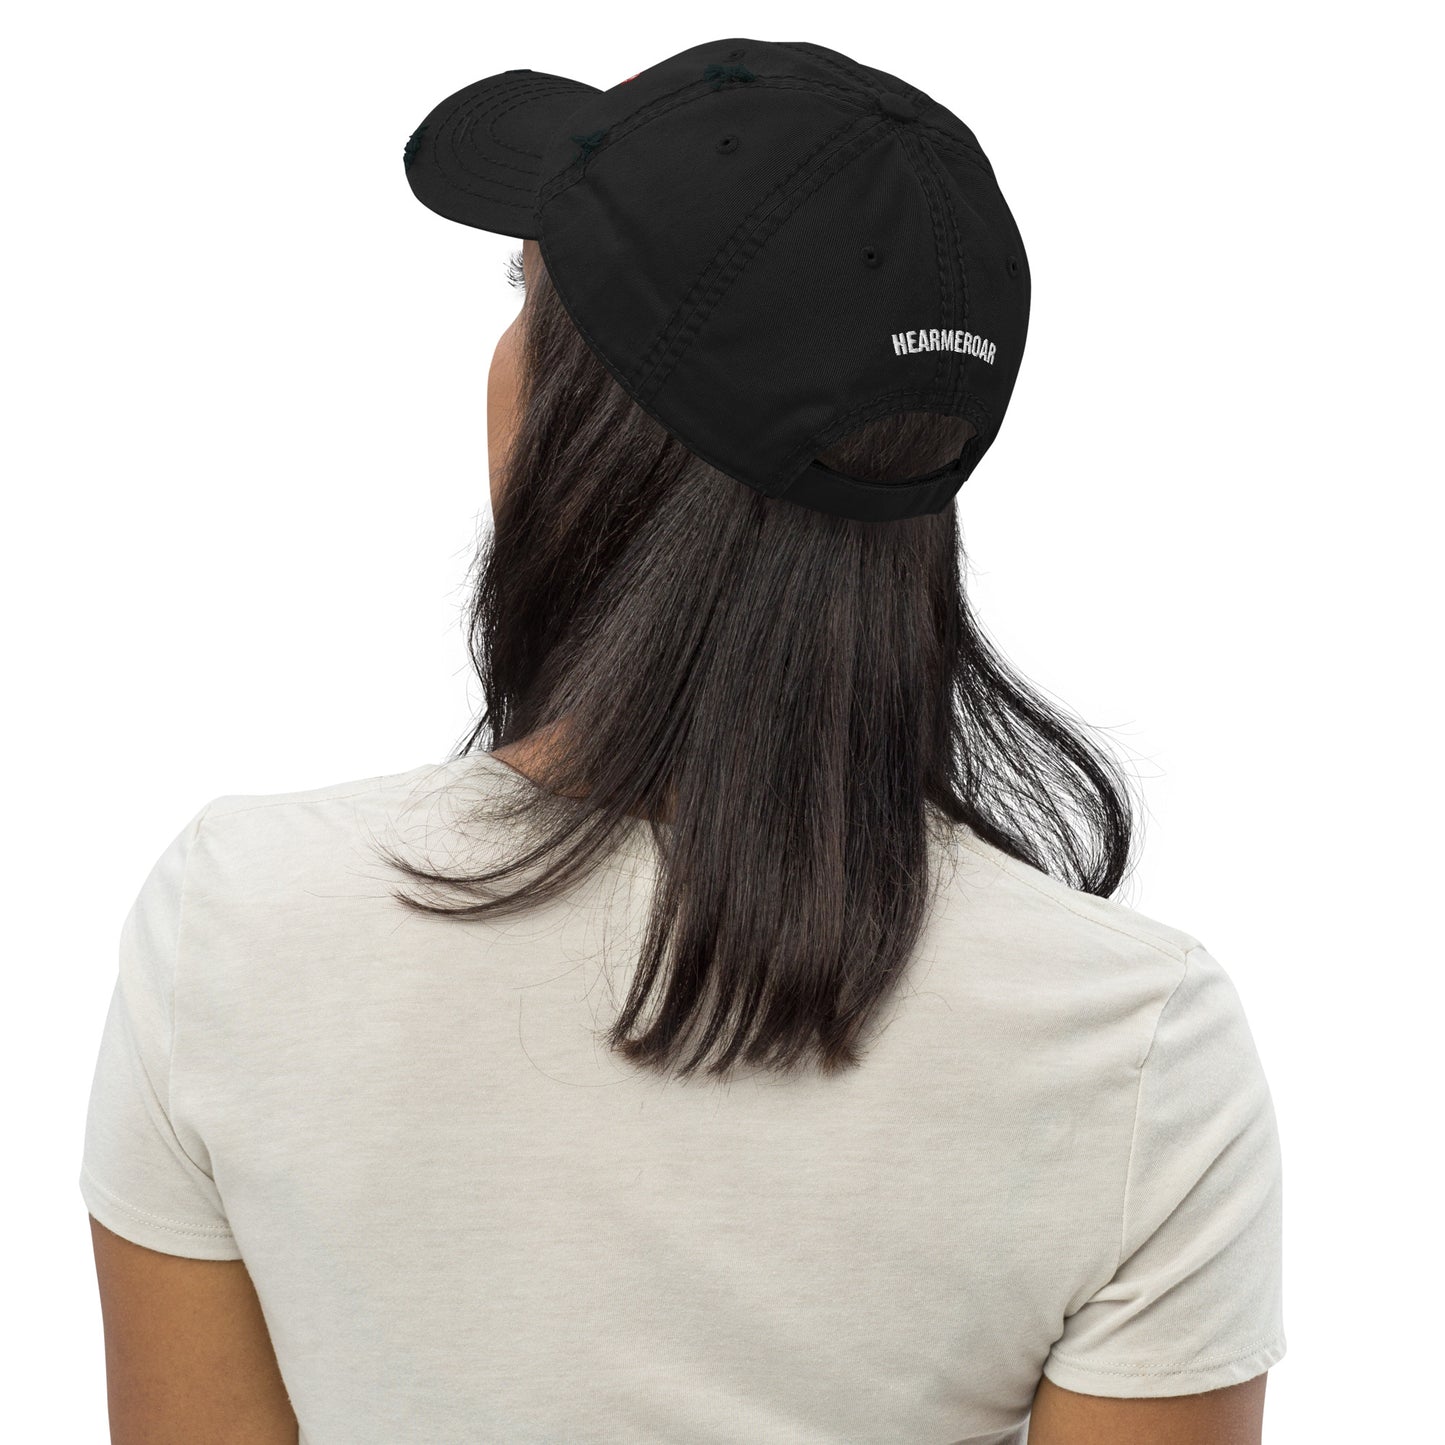 Fuck You Thought Distressed Dad Hat